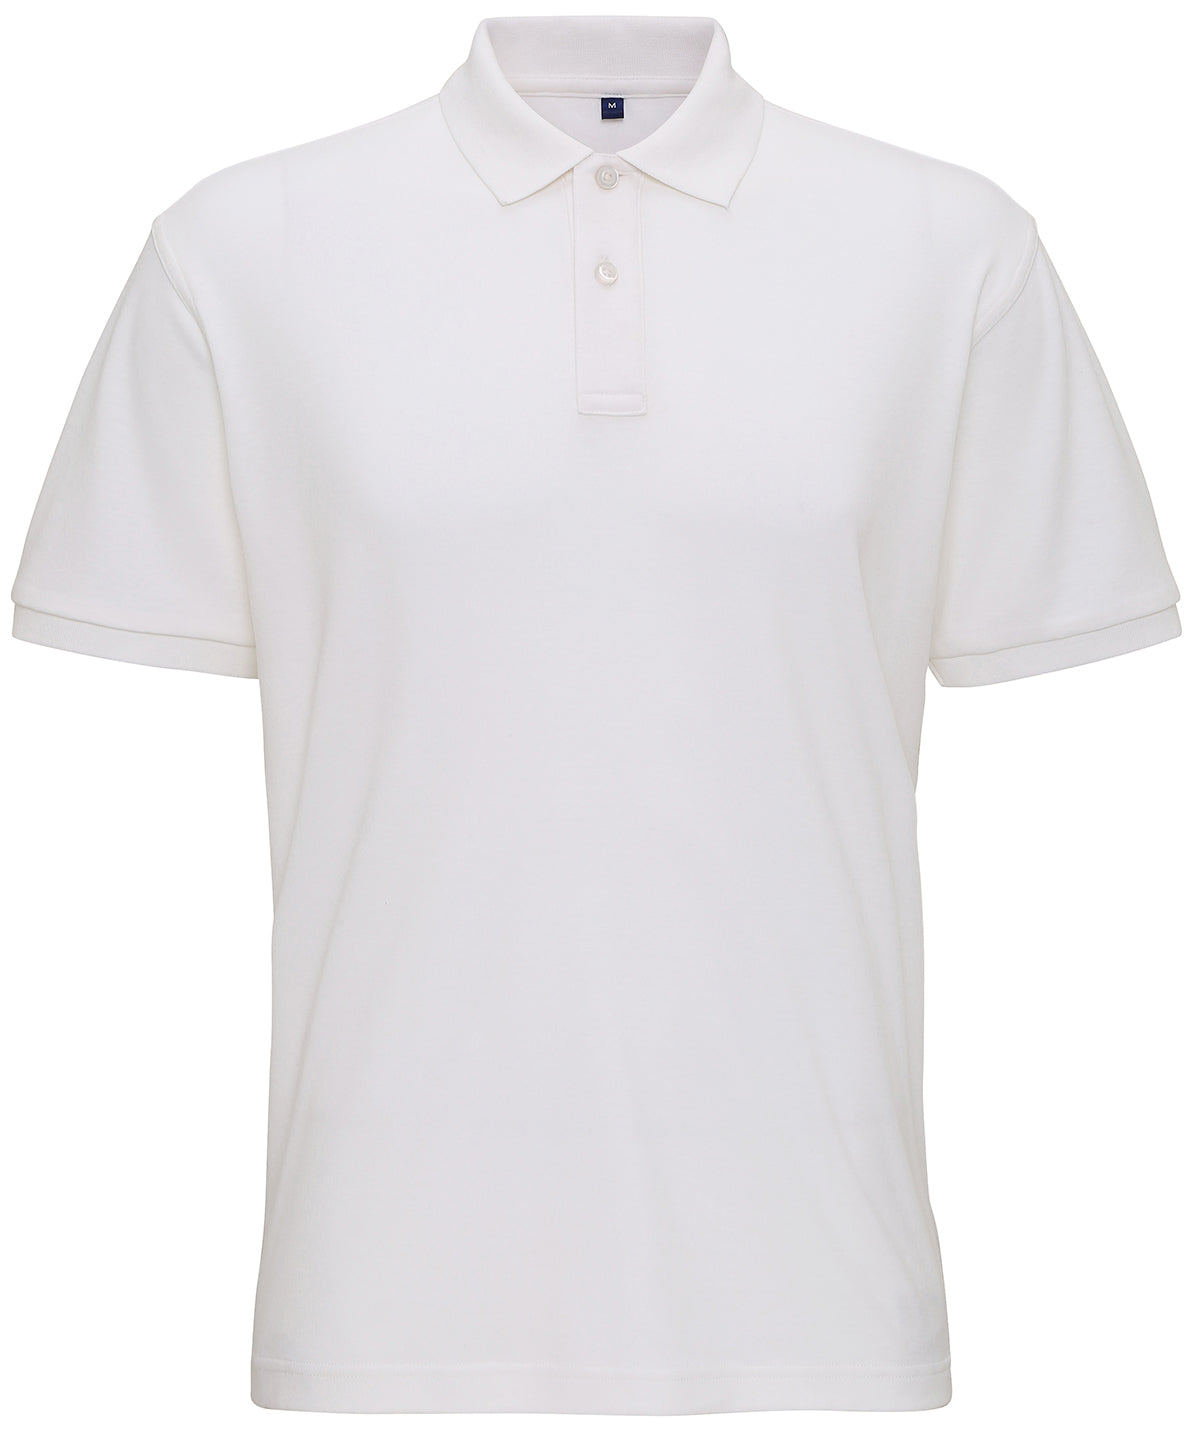 Asquith & Fox Mens super smooth knit polo